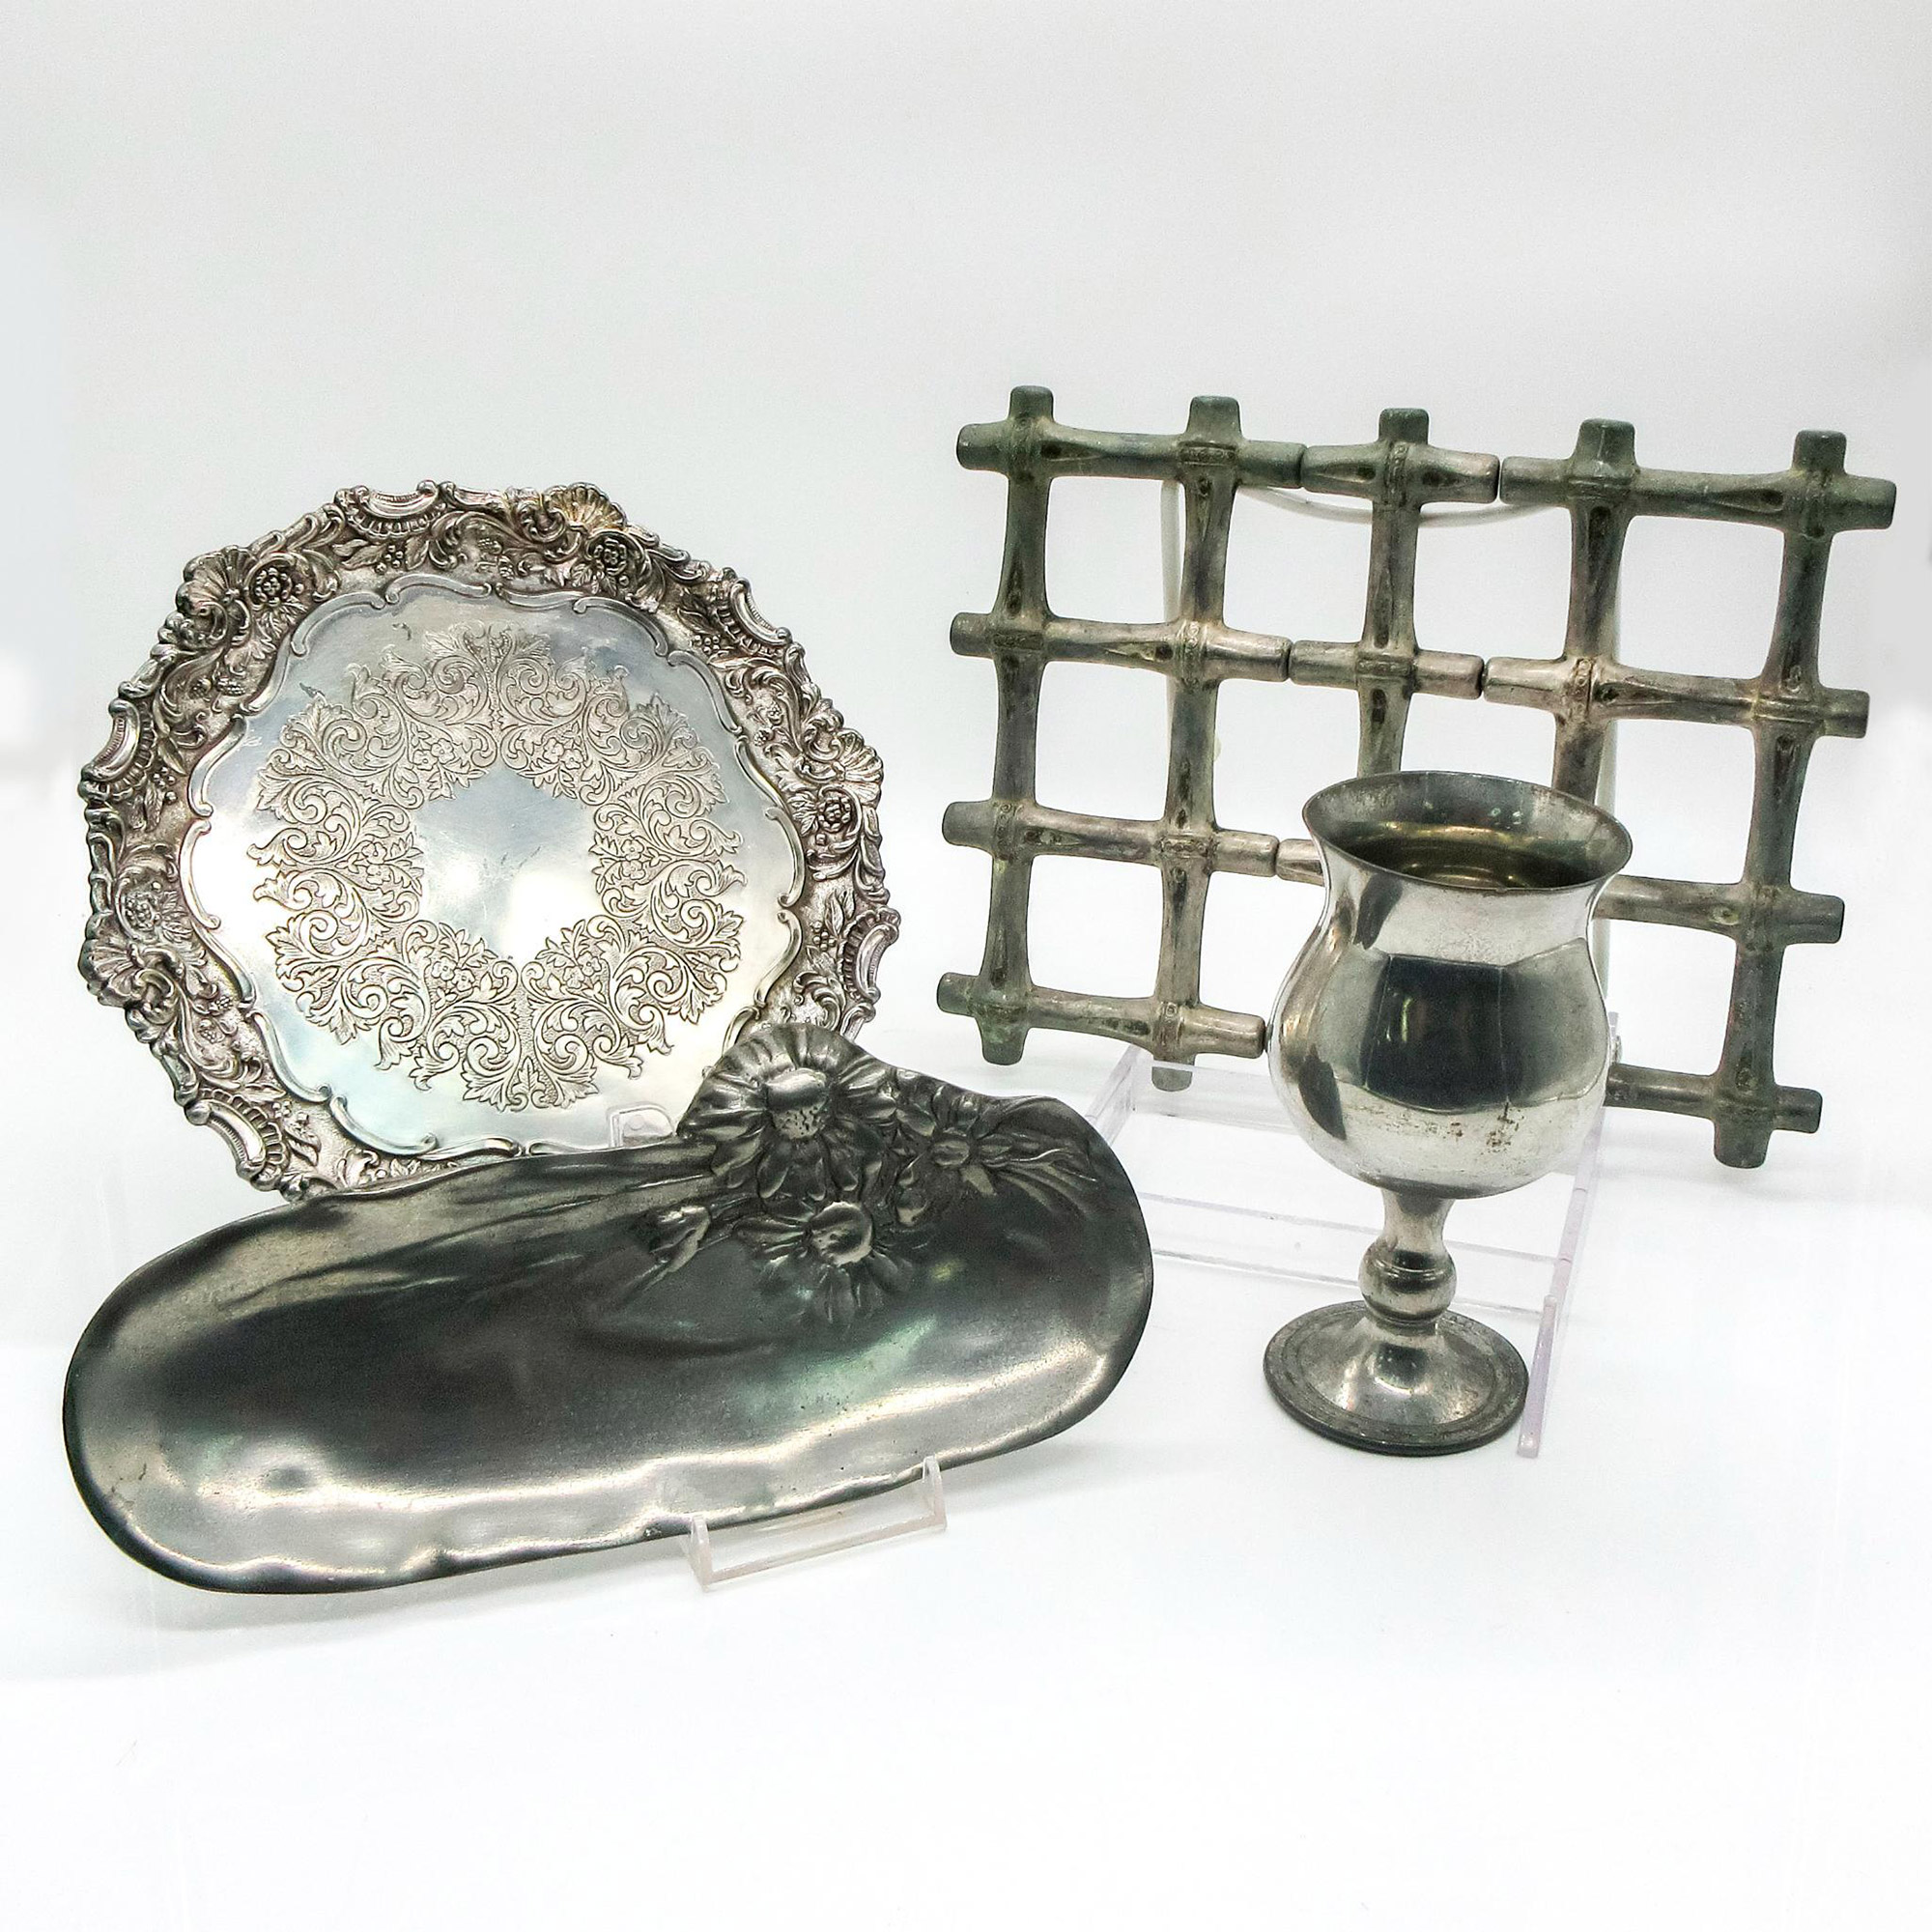 4pc Vintage Pewter Silver Trays And Goblet Set - Image 2 of 3